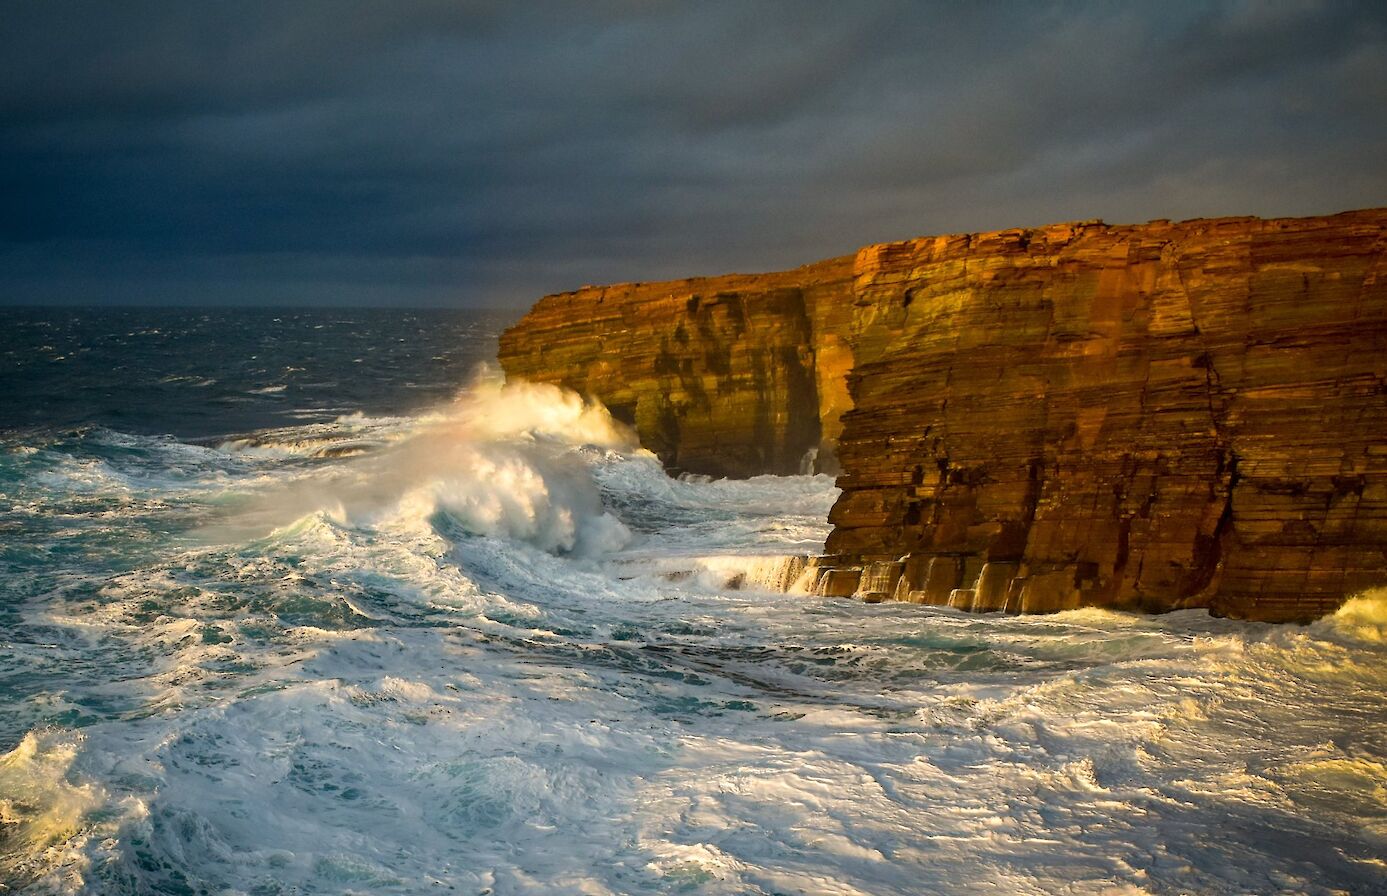 Yesnaby, Orkney - image by Scott Oxford